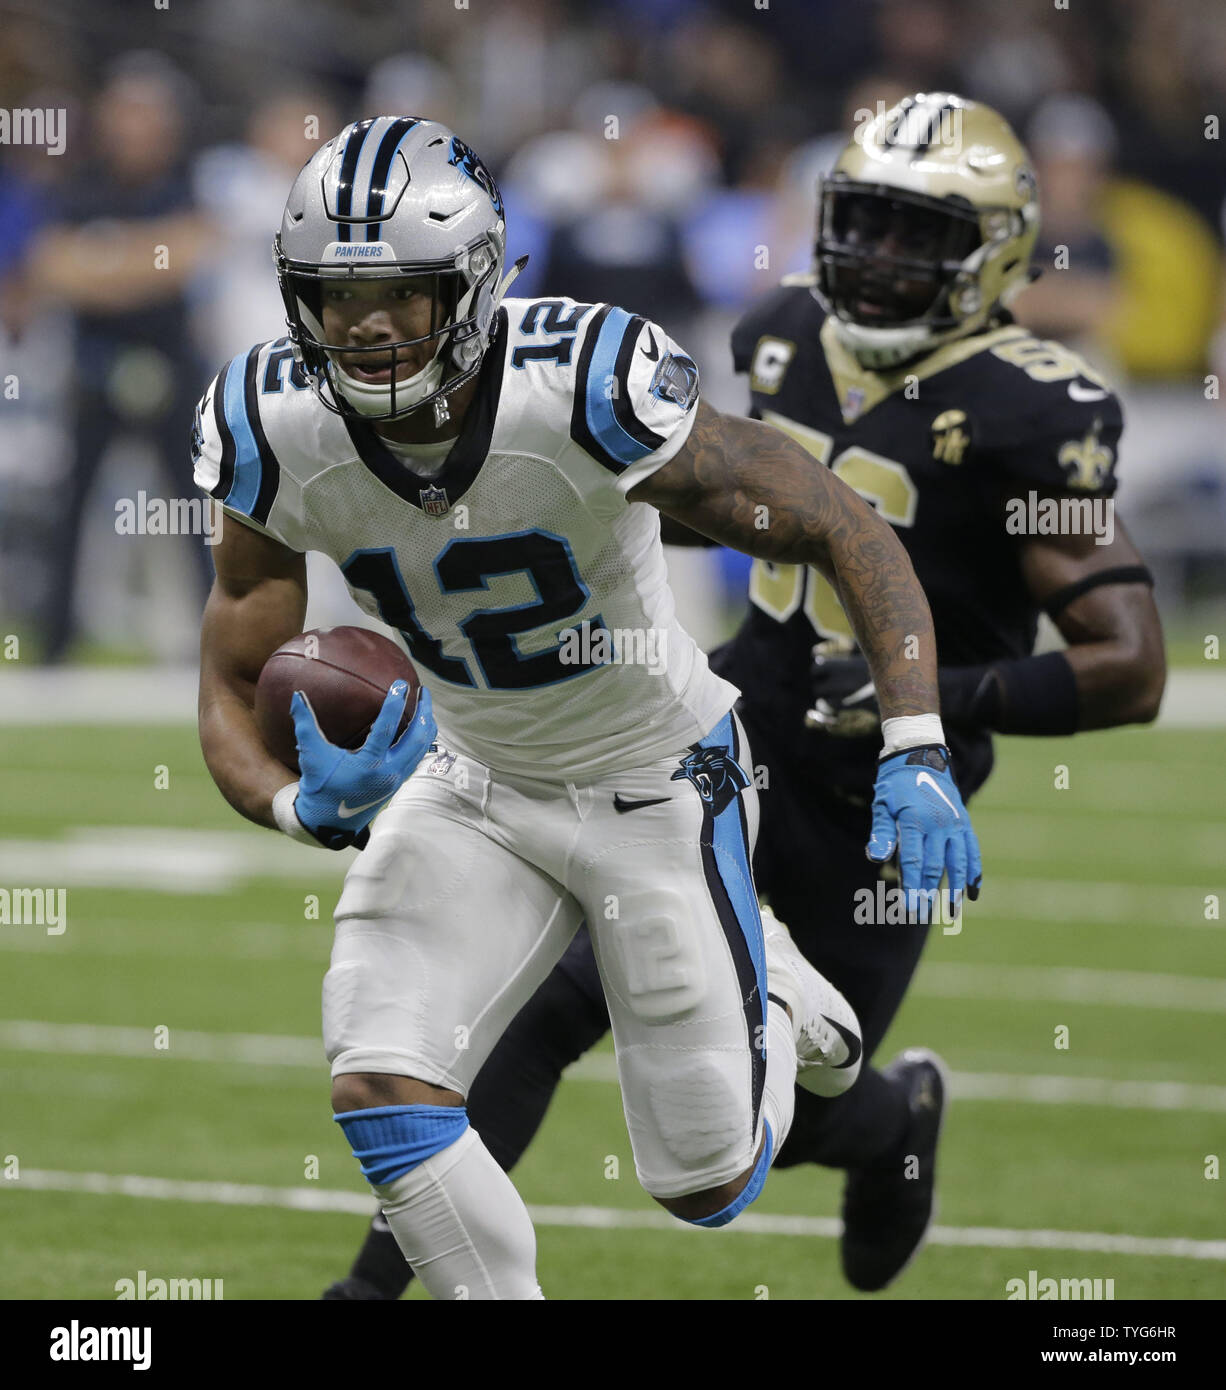 Carolina Panthers wide receiver D.J. Moore (12) takes a Kyle Allen pass 20  yards foe a touchdown against the New Orleans Saints at the Mercedes-Benz  Superdome in New Orleans December 30, 2018.